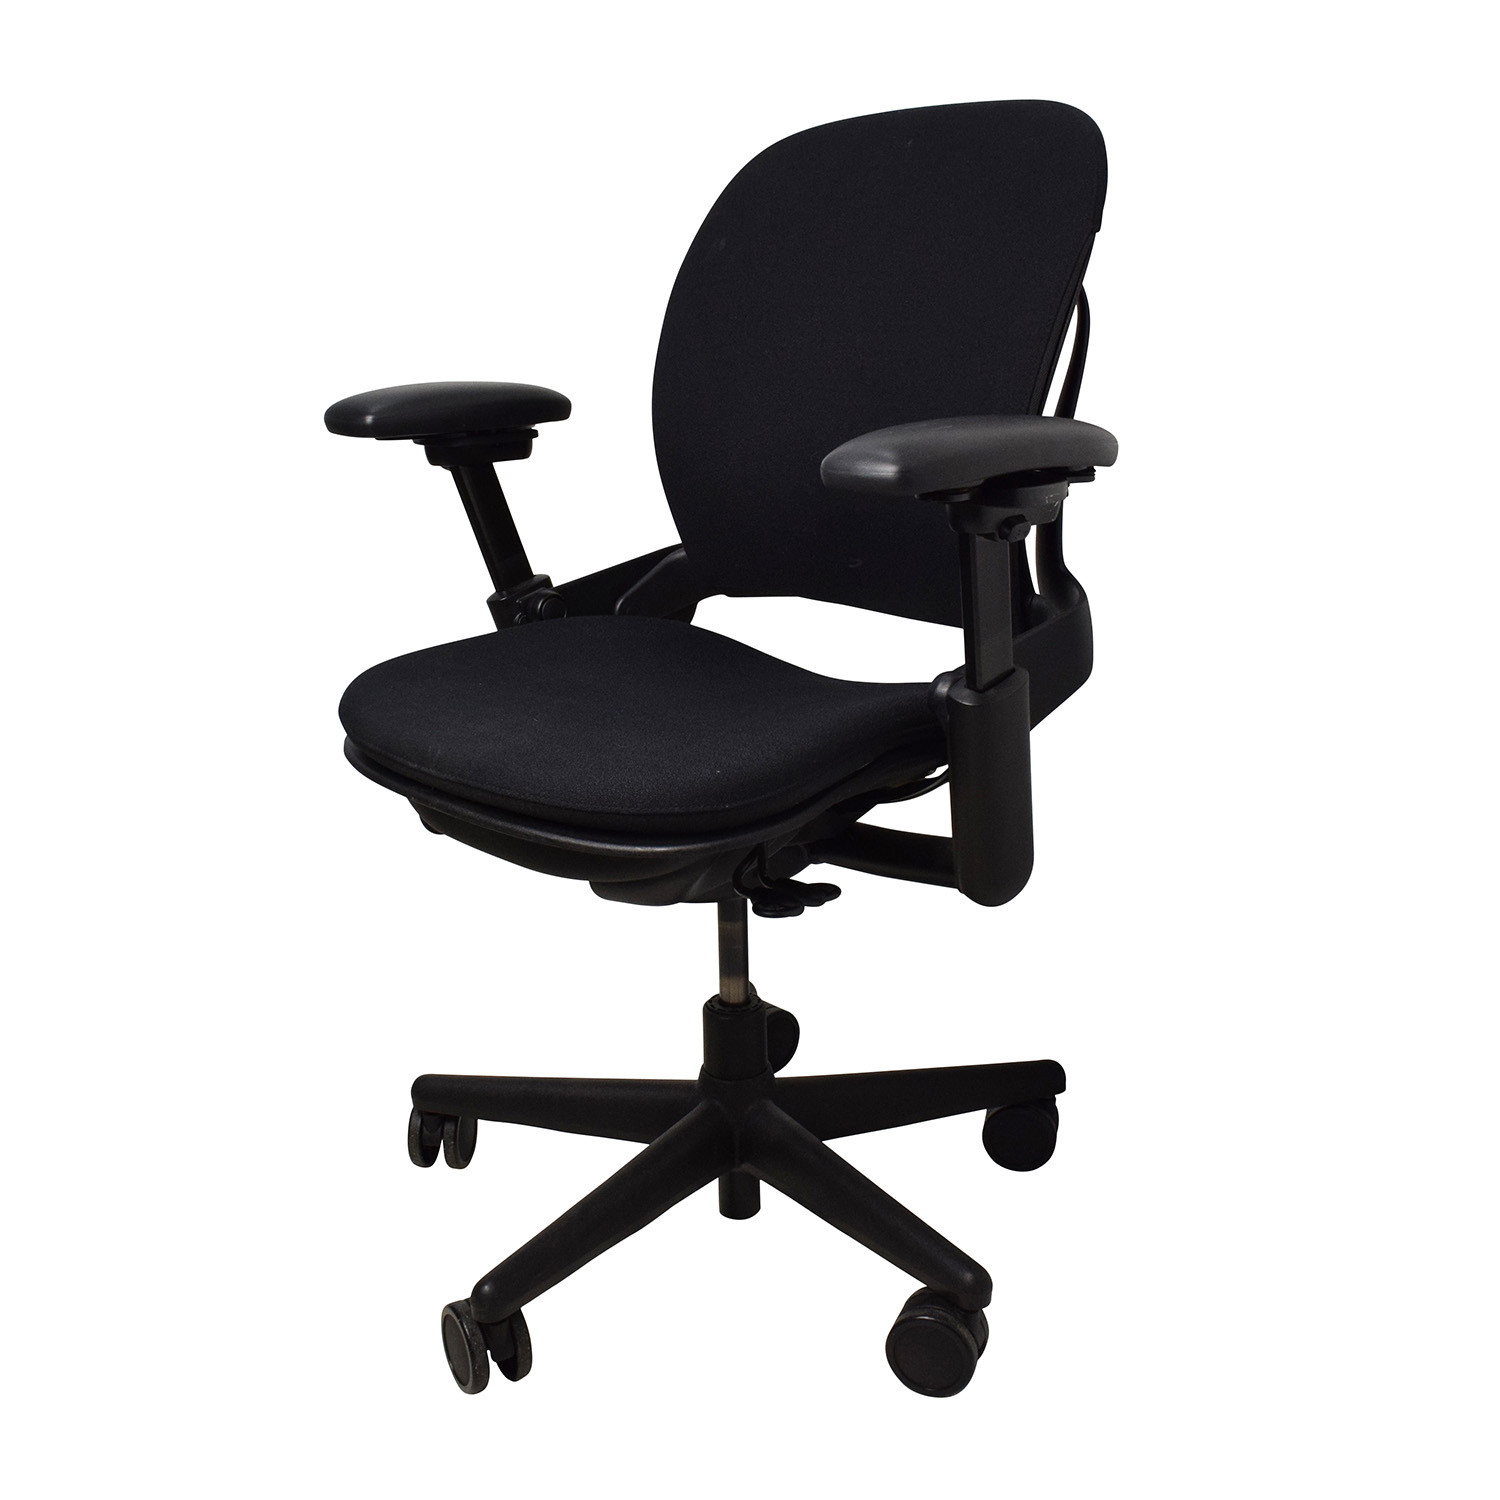 Best ideas about Office Desk Chair
. Save or Pin OFF Adjustable Black fice Desk Chair Chairs Now.